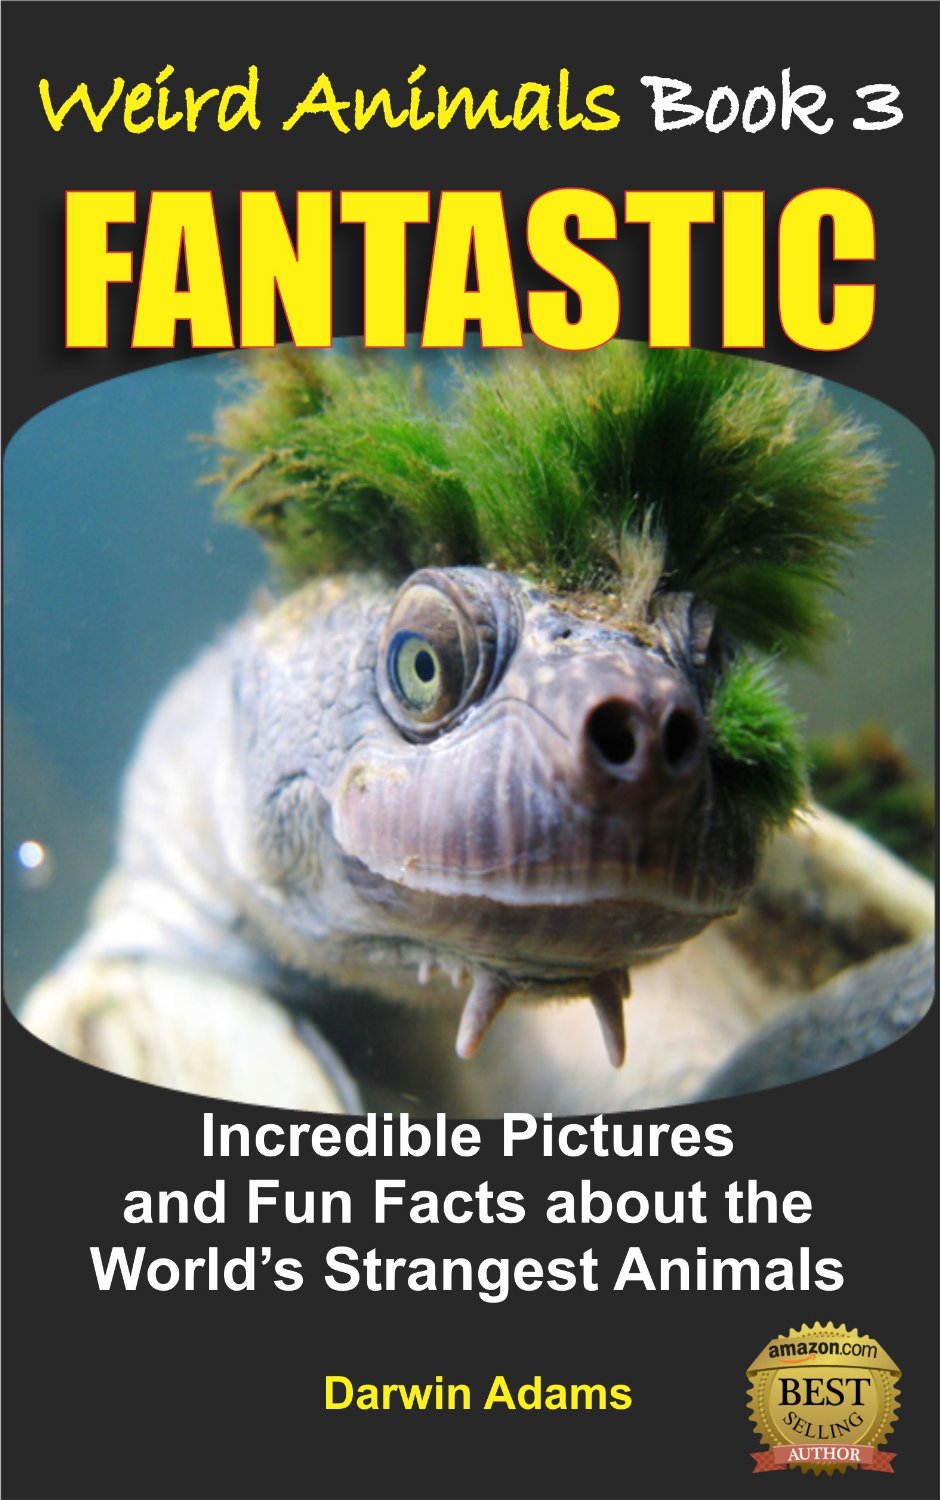 Weird Animals #3 – FANTASTIC – Amazing Pictures and Fun Facts about the World’s Most Unusual Animals by Darwin Adams